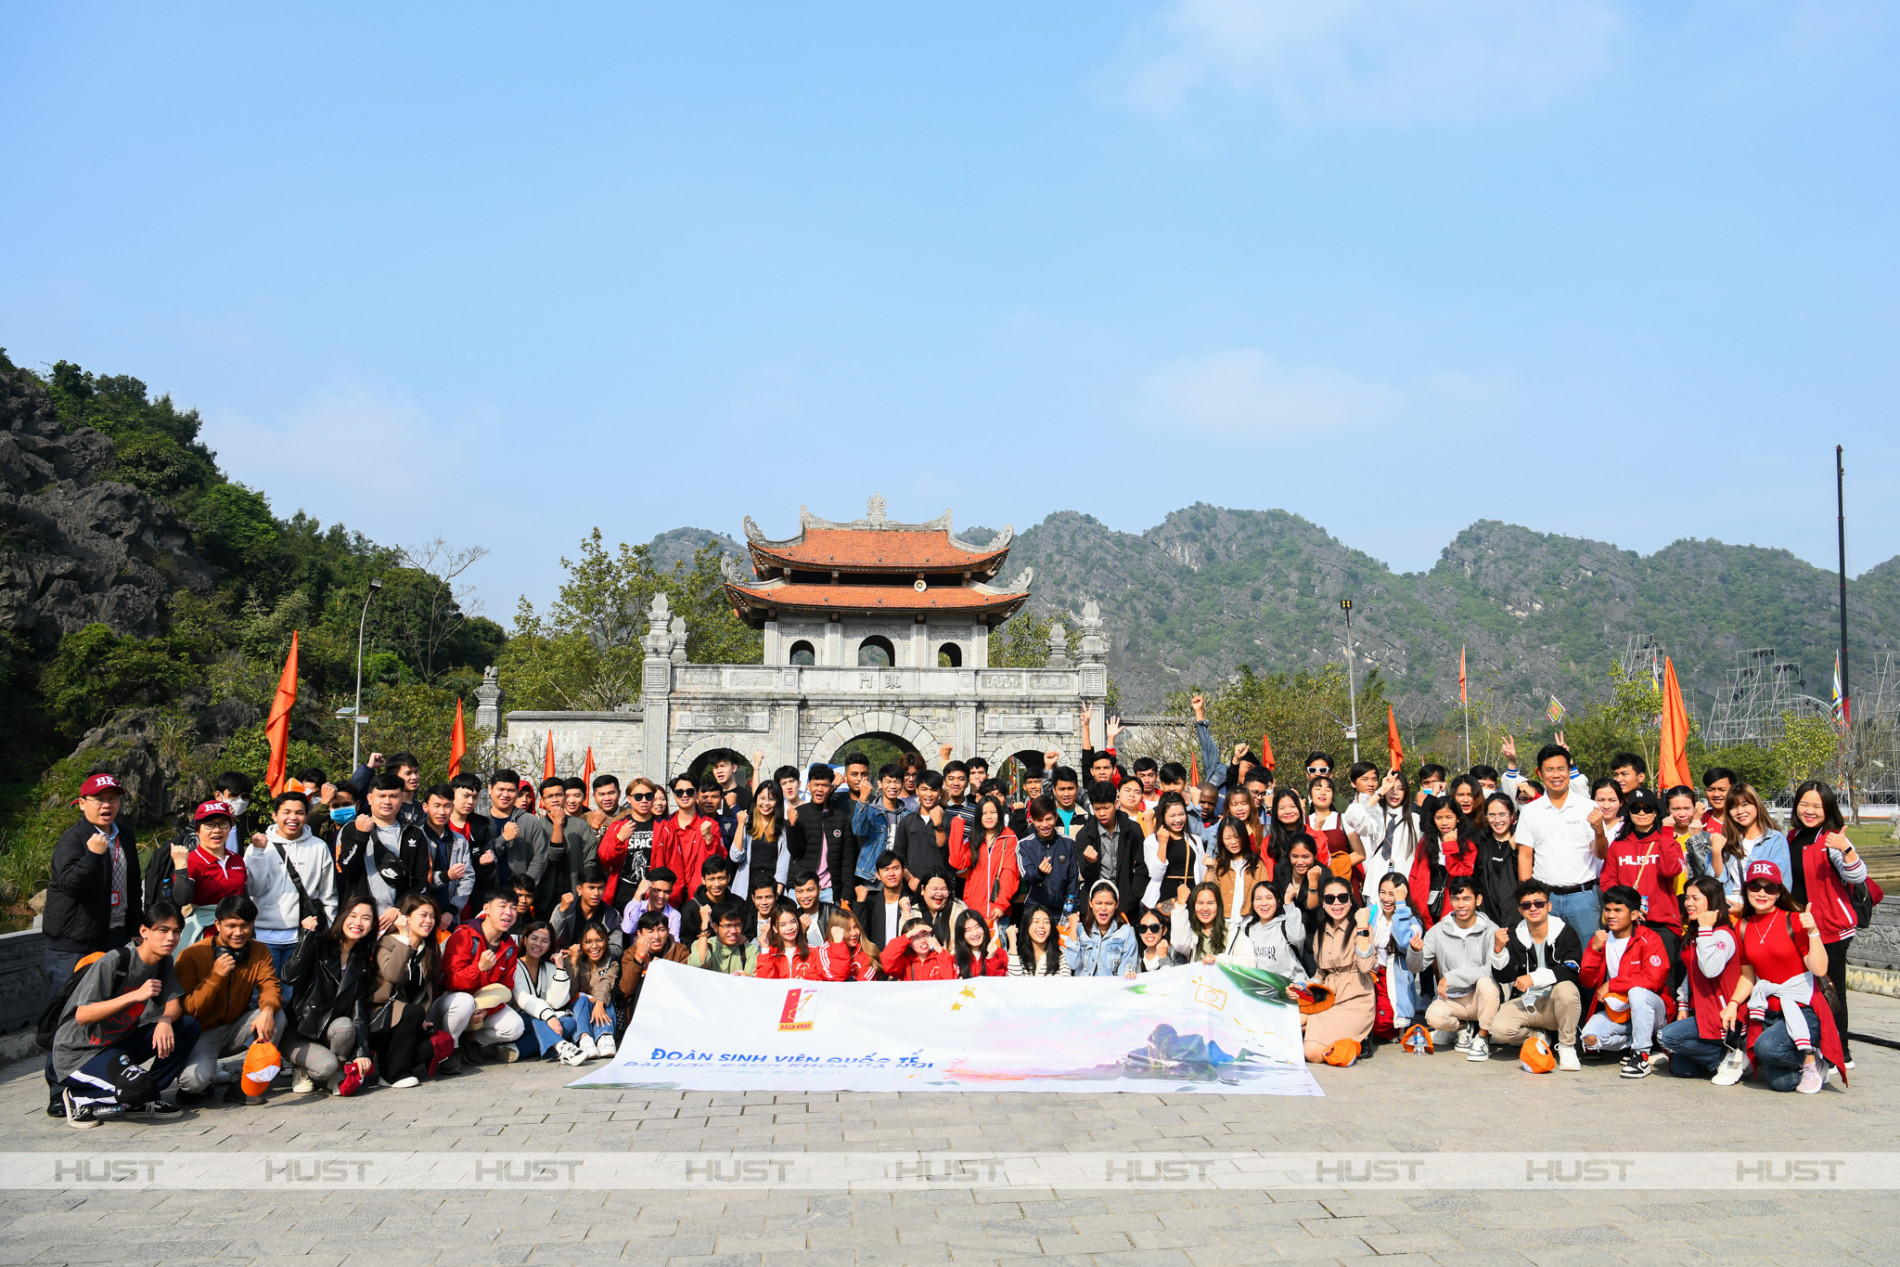 More than 150 overseas students enjoyed the trip to Ninh Binh province